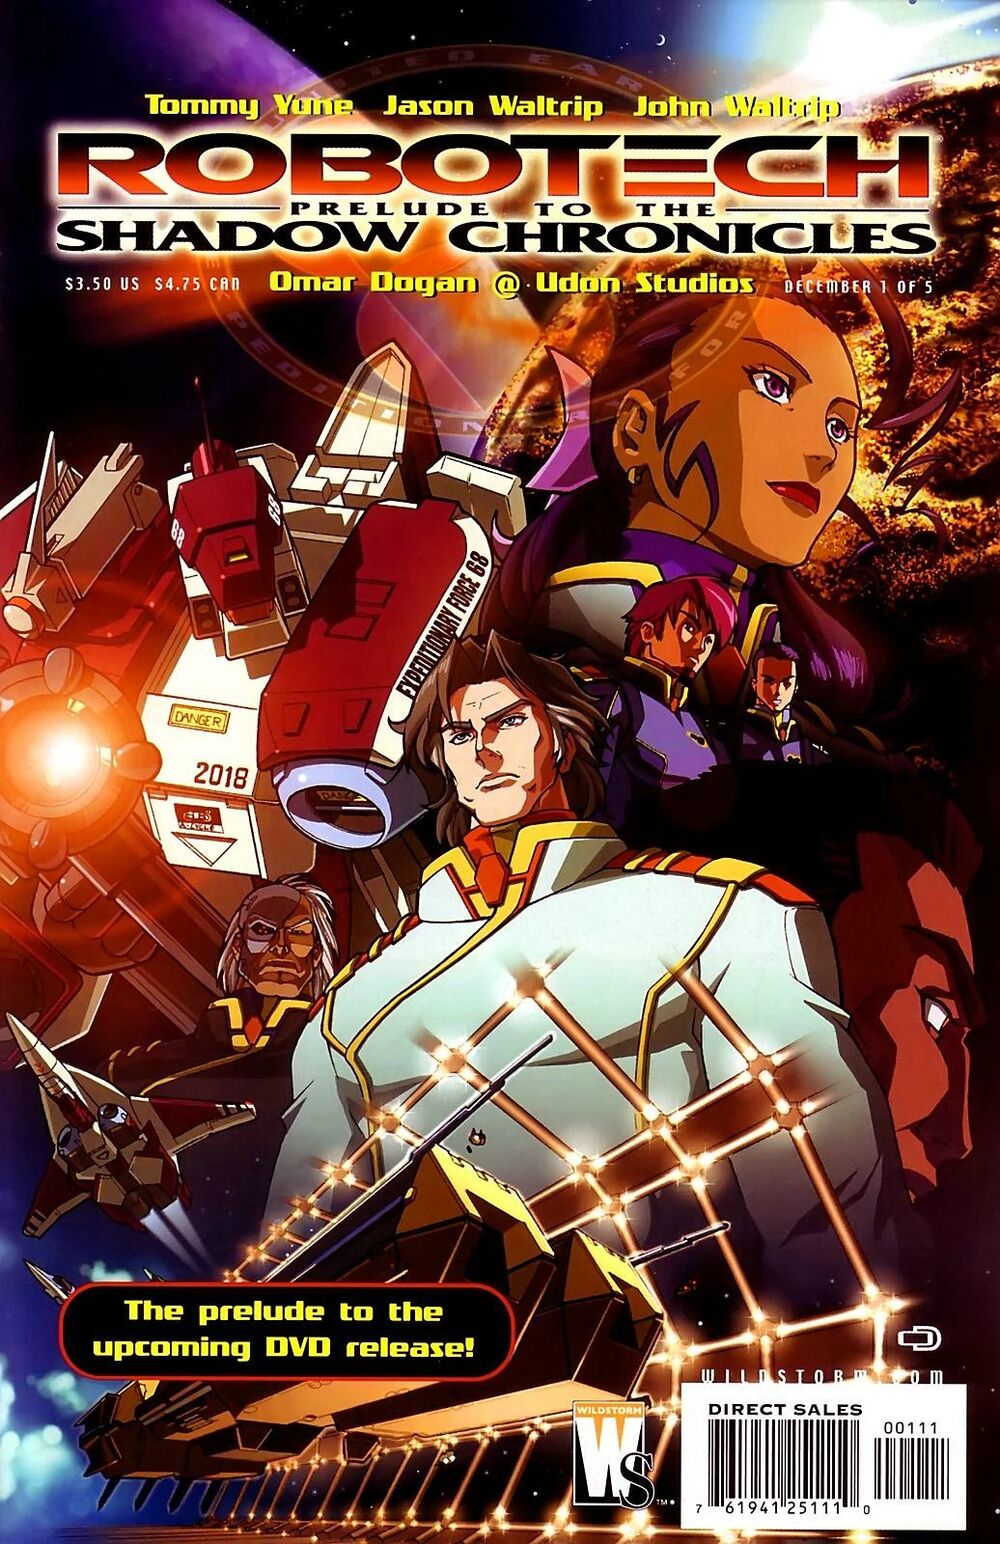 Robotech: Prelude To The Shadow Chronicles Limited Series Bundle Issues 1-5